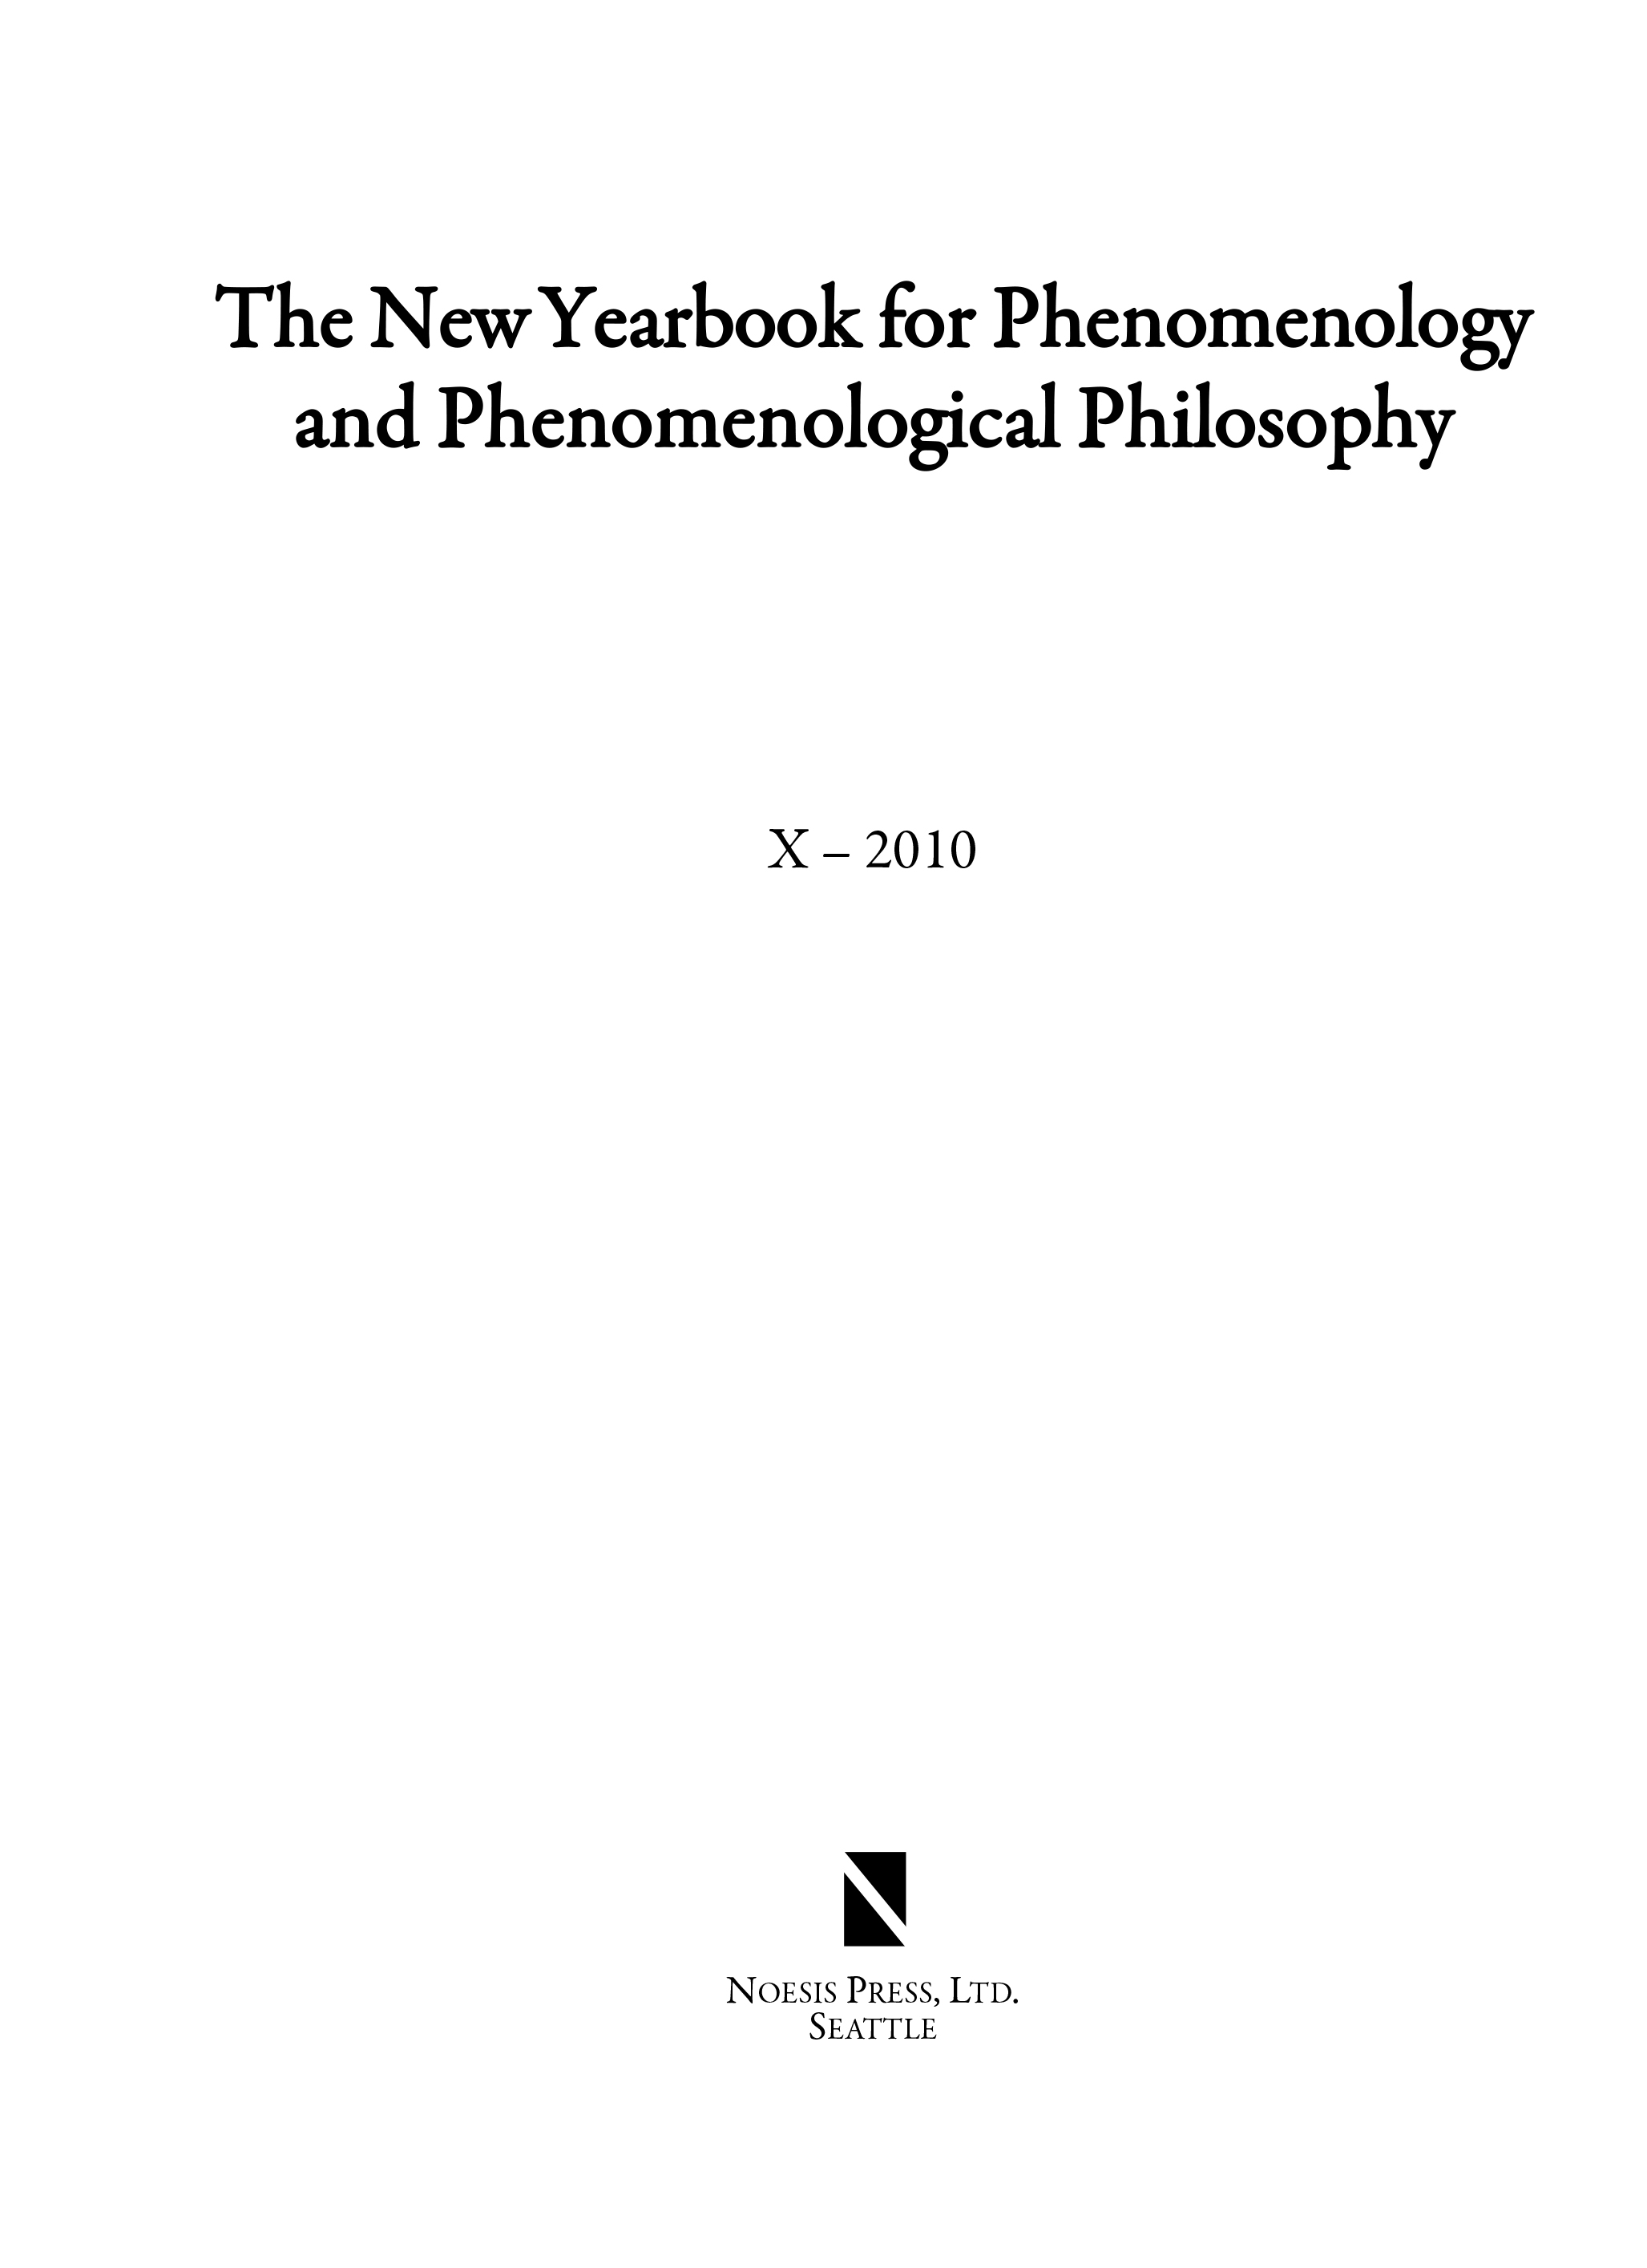 Cover of New Yearbook for Phenomenology and Phenomenological Philosophy